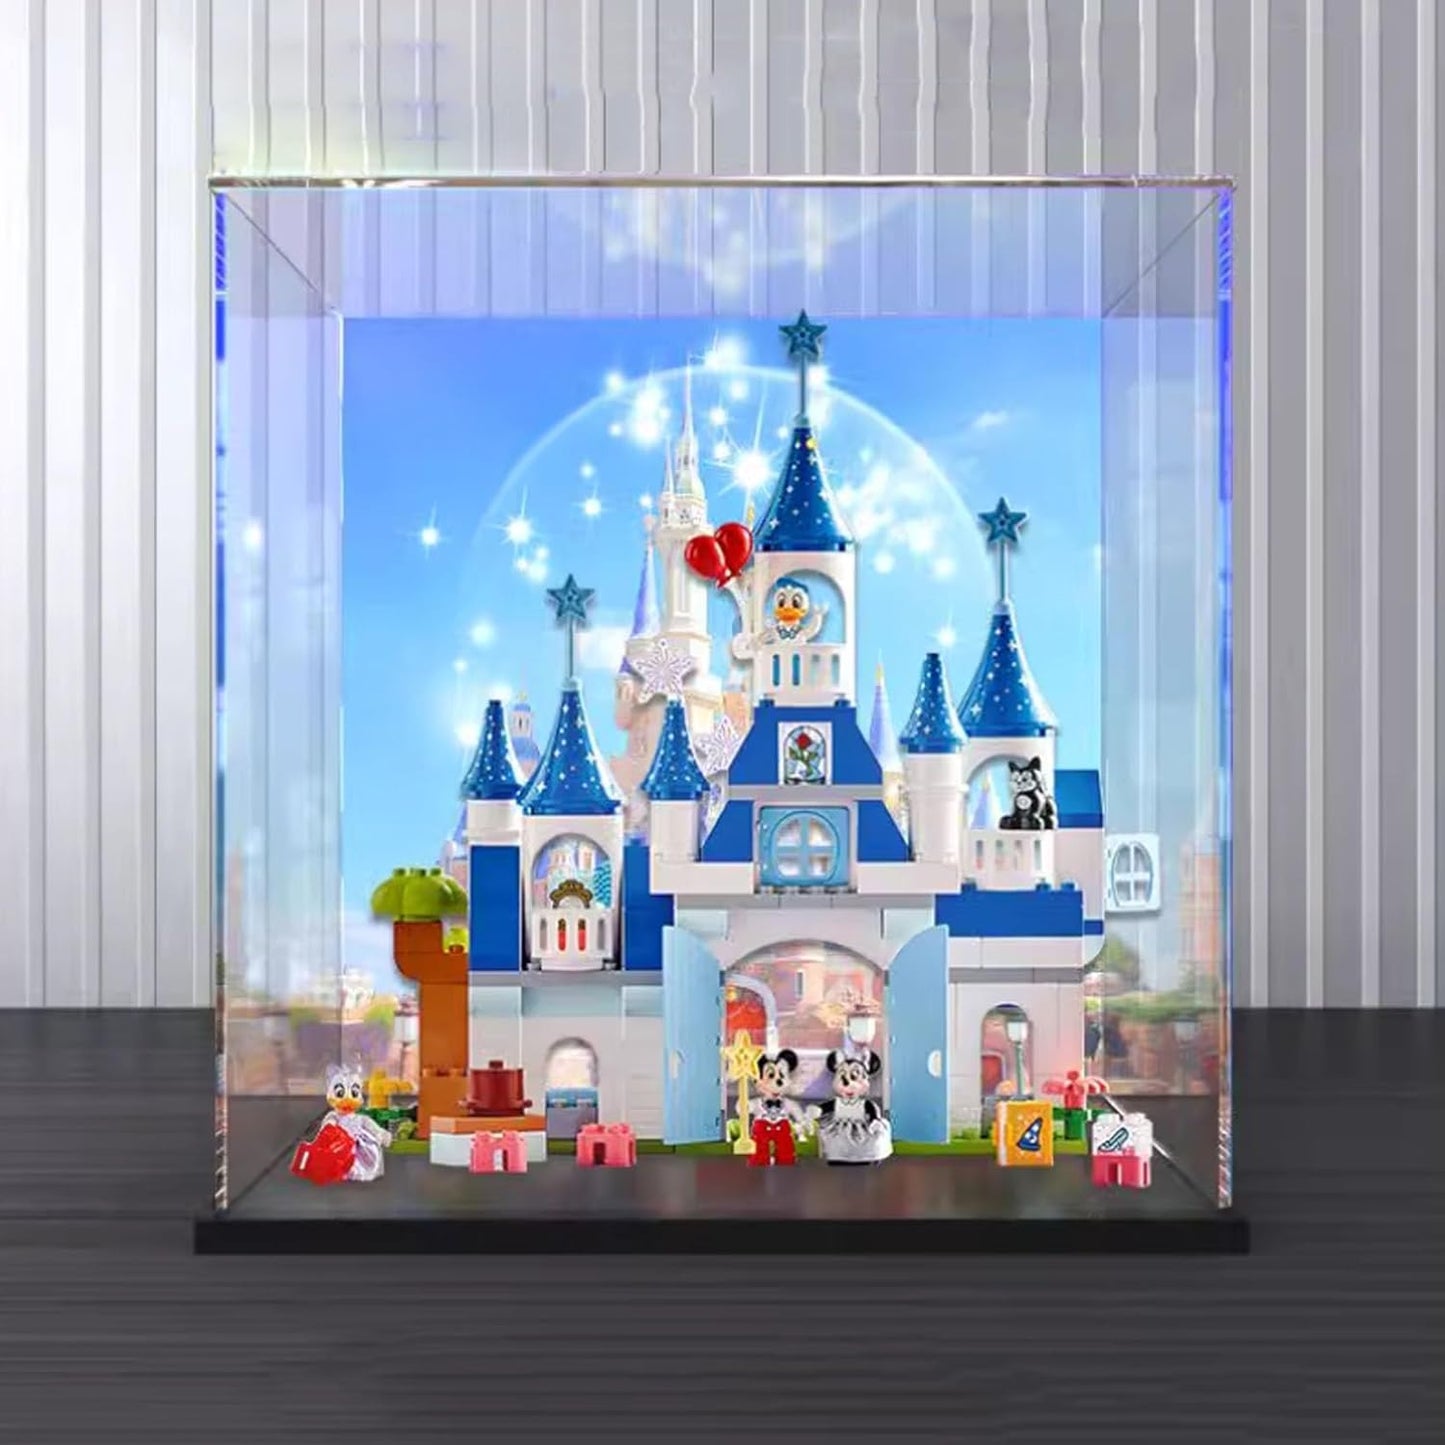 Acrylic Display Case for Lego Disney 3in1 Magic Castle 10998 Model - Dustproof Anti-UV Storage Box for Collectors (Transparent)